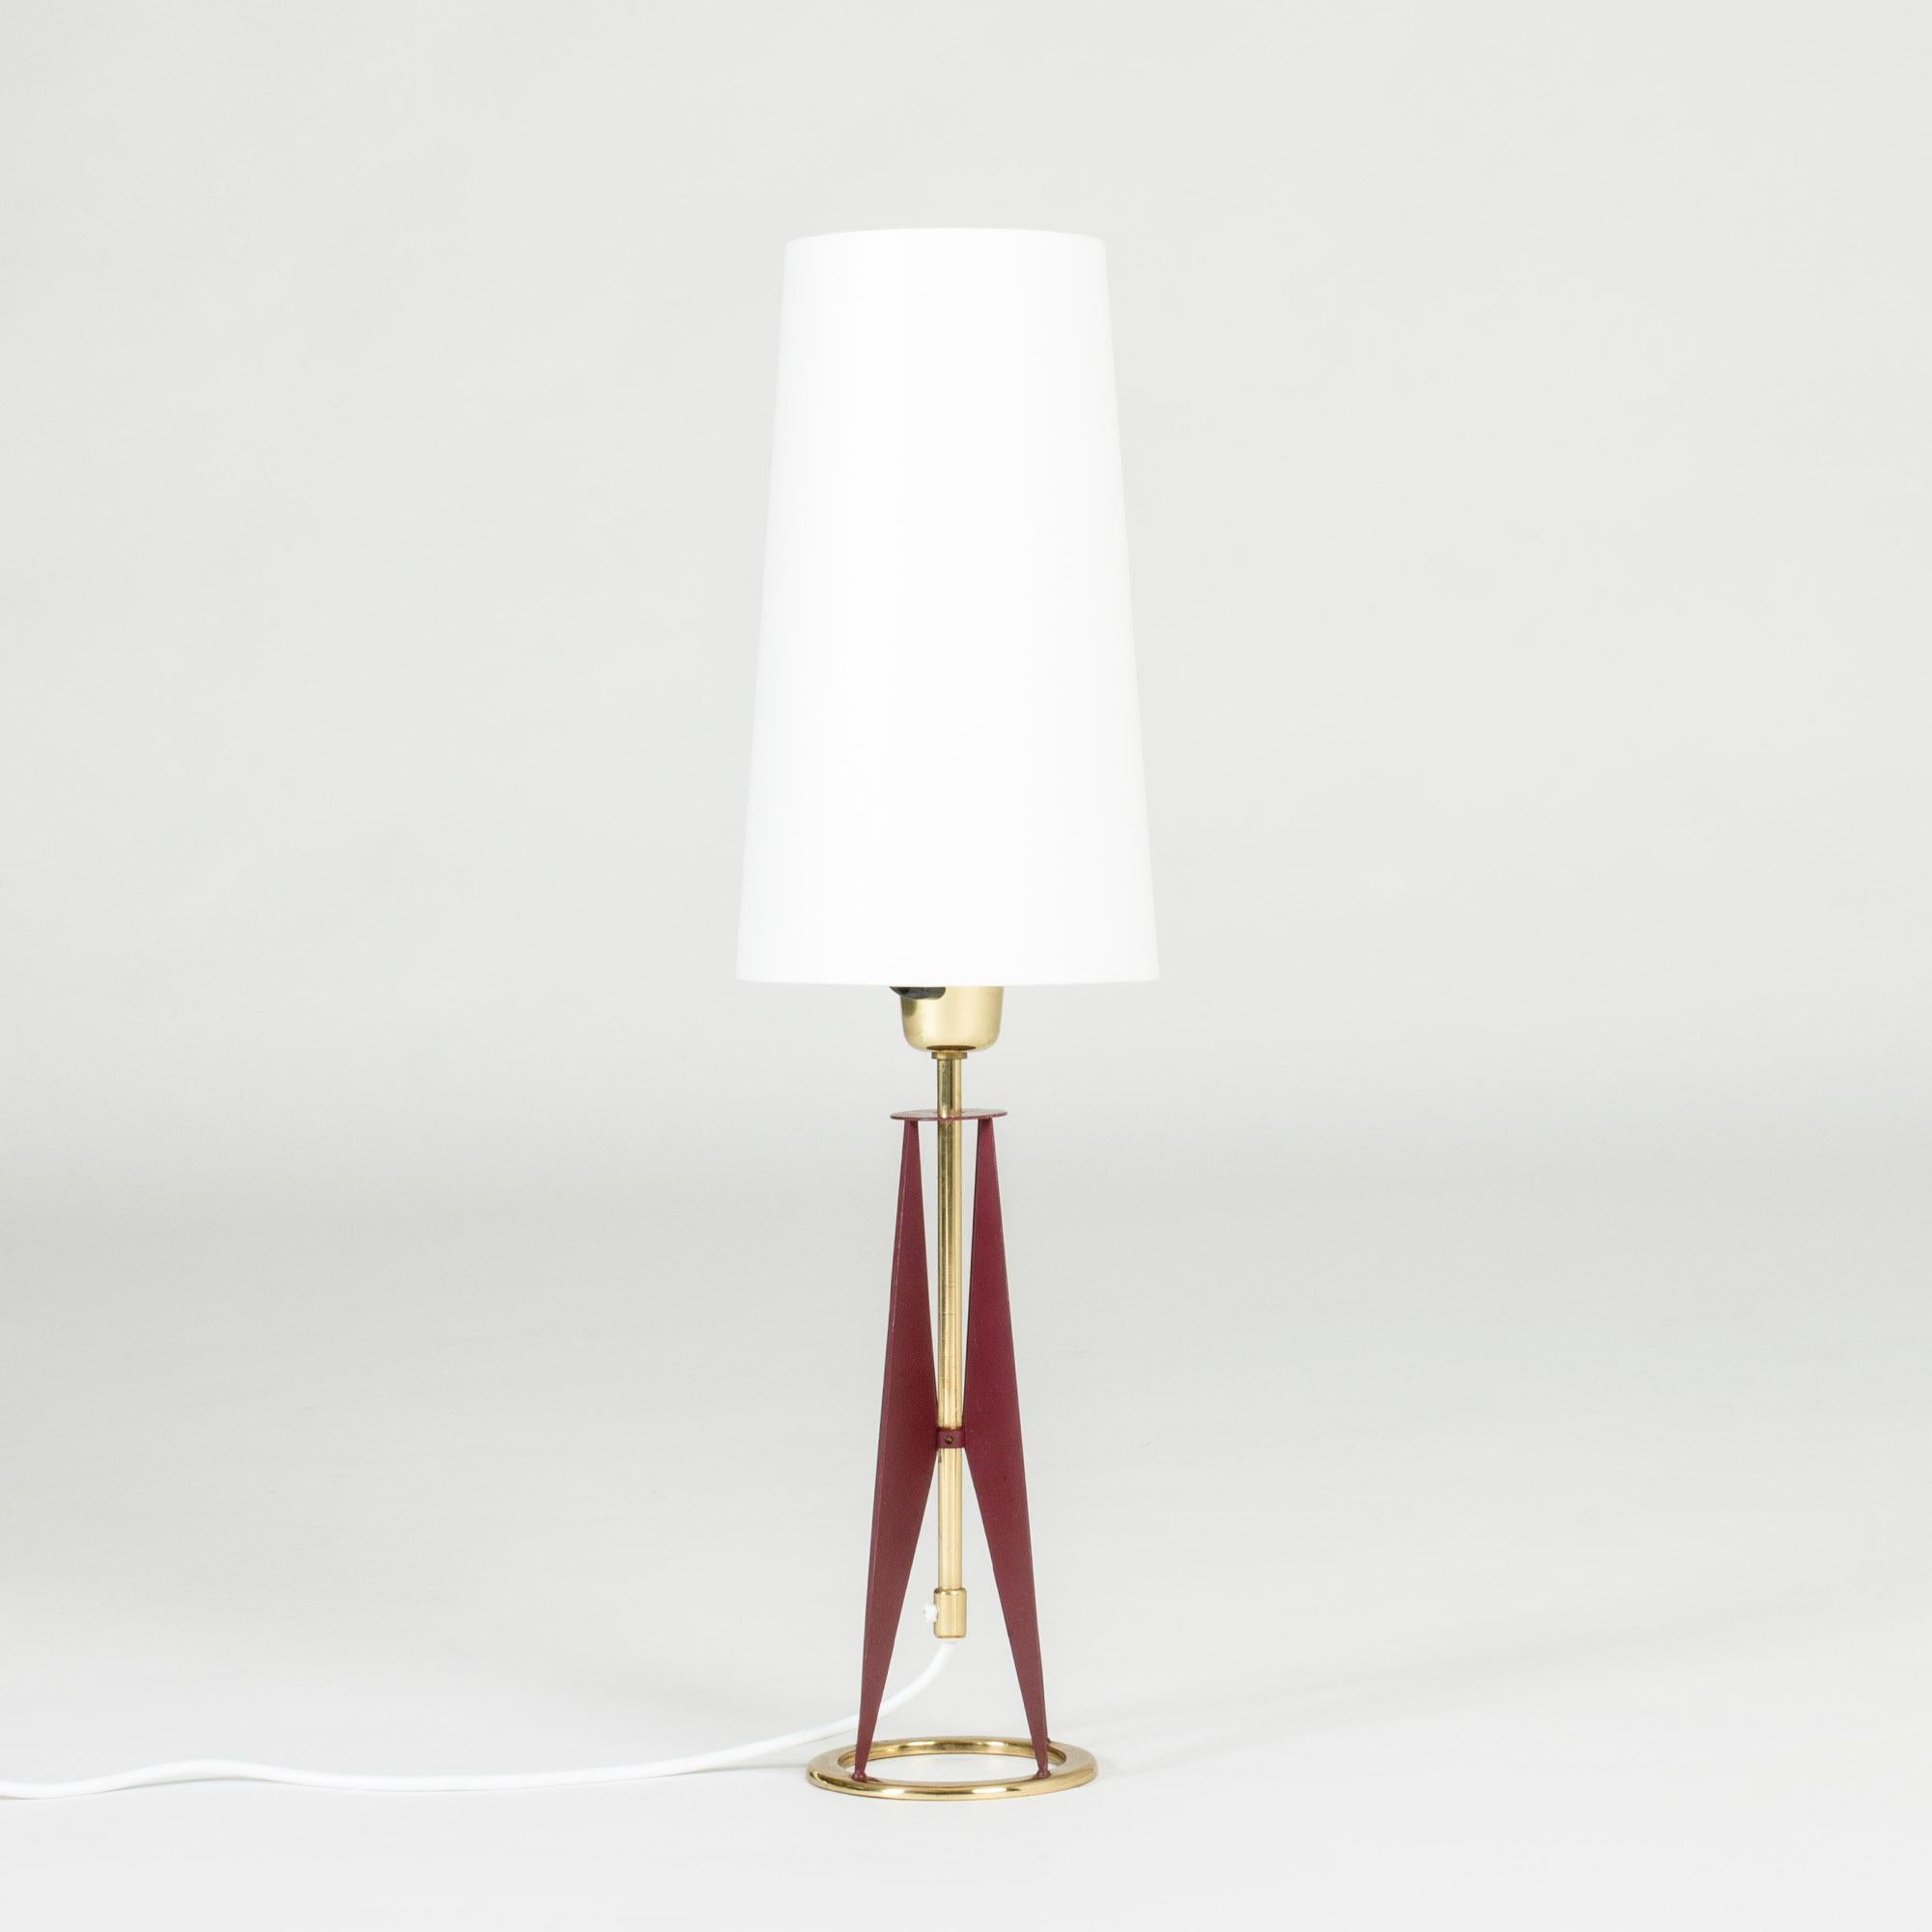 Cool table lamp by Svend Aage Holm Sørensen, made from brass and metal in a graphic design, lacquered red.